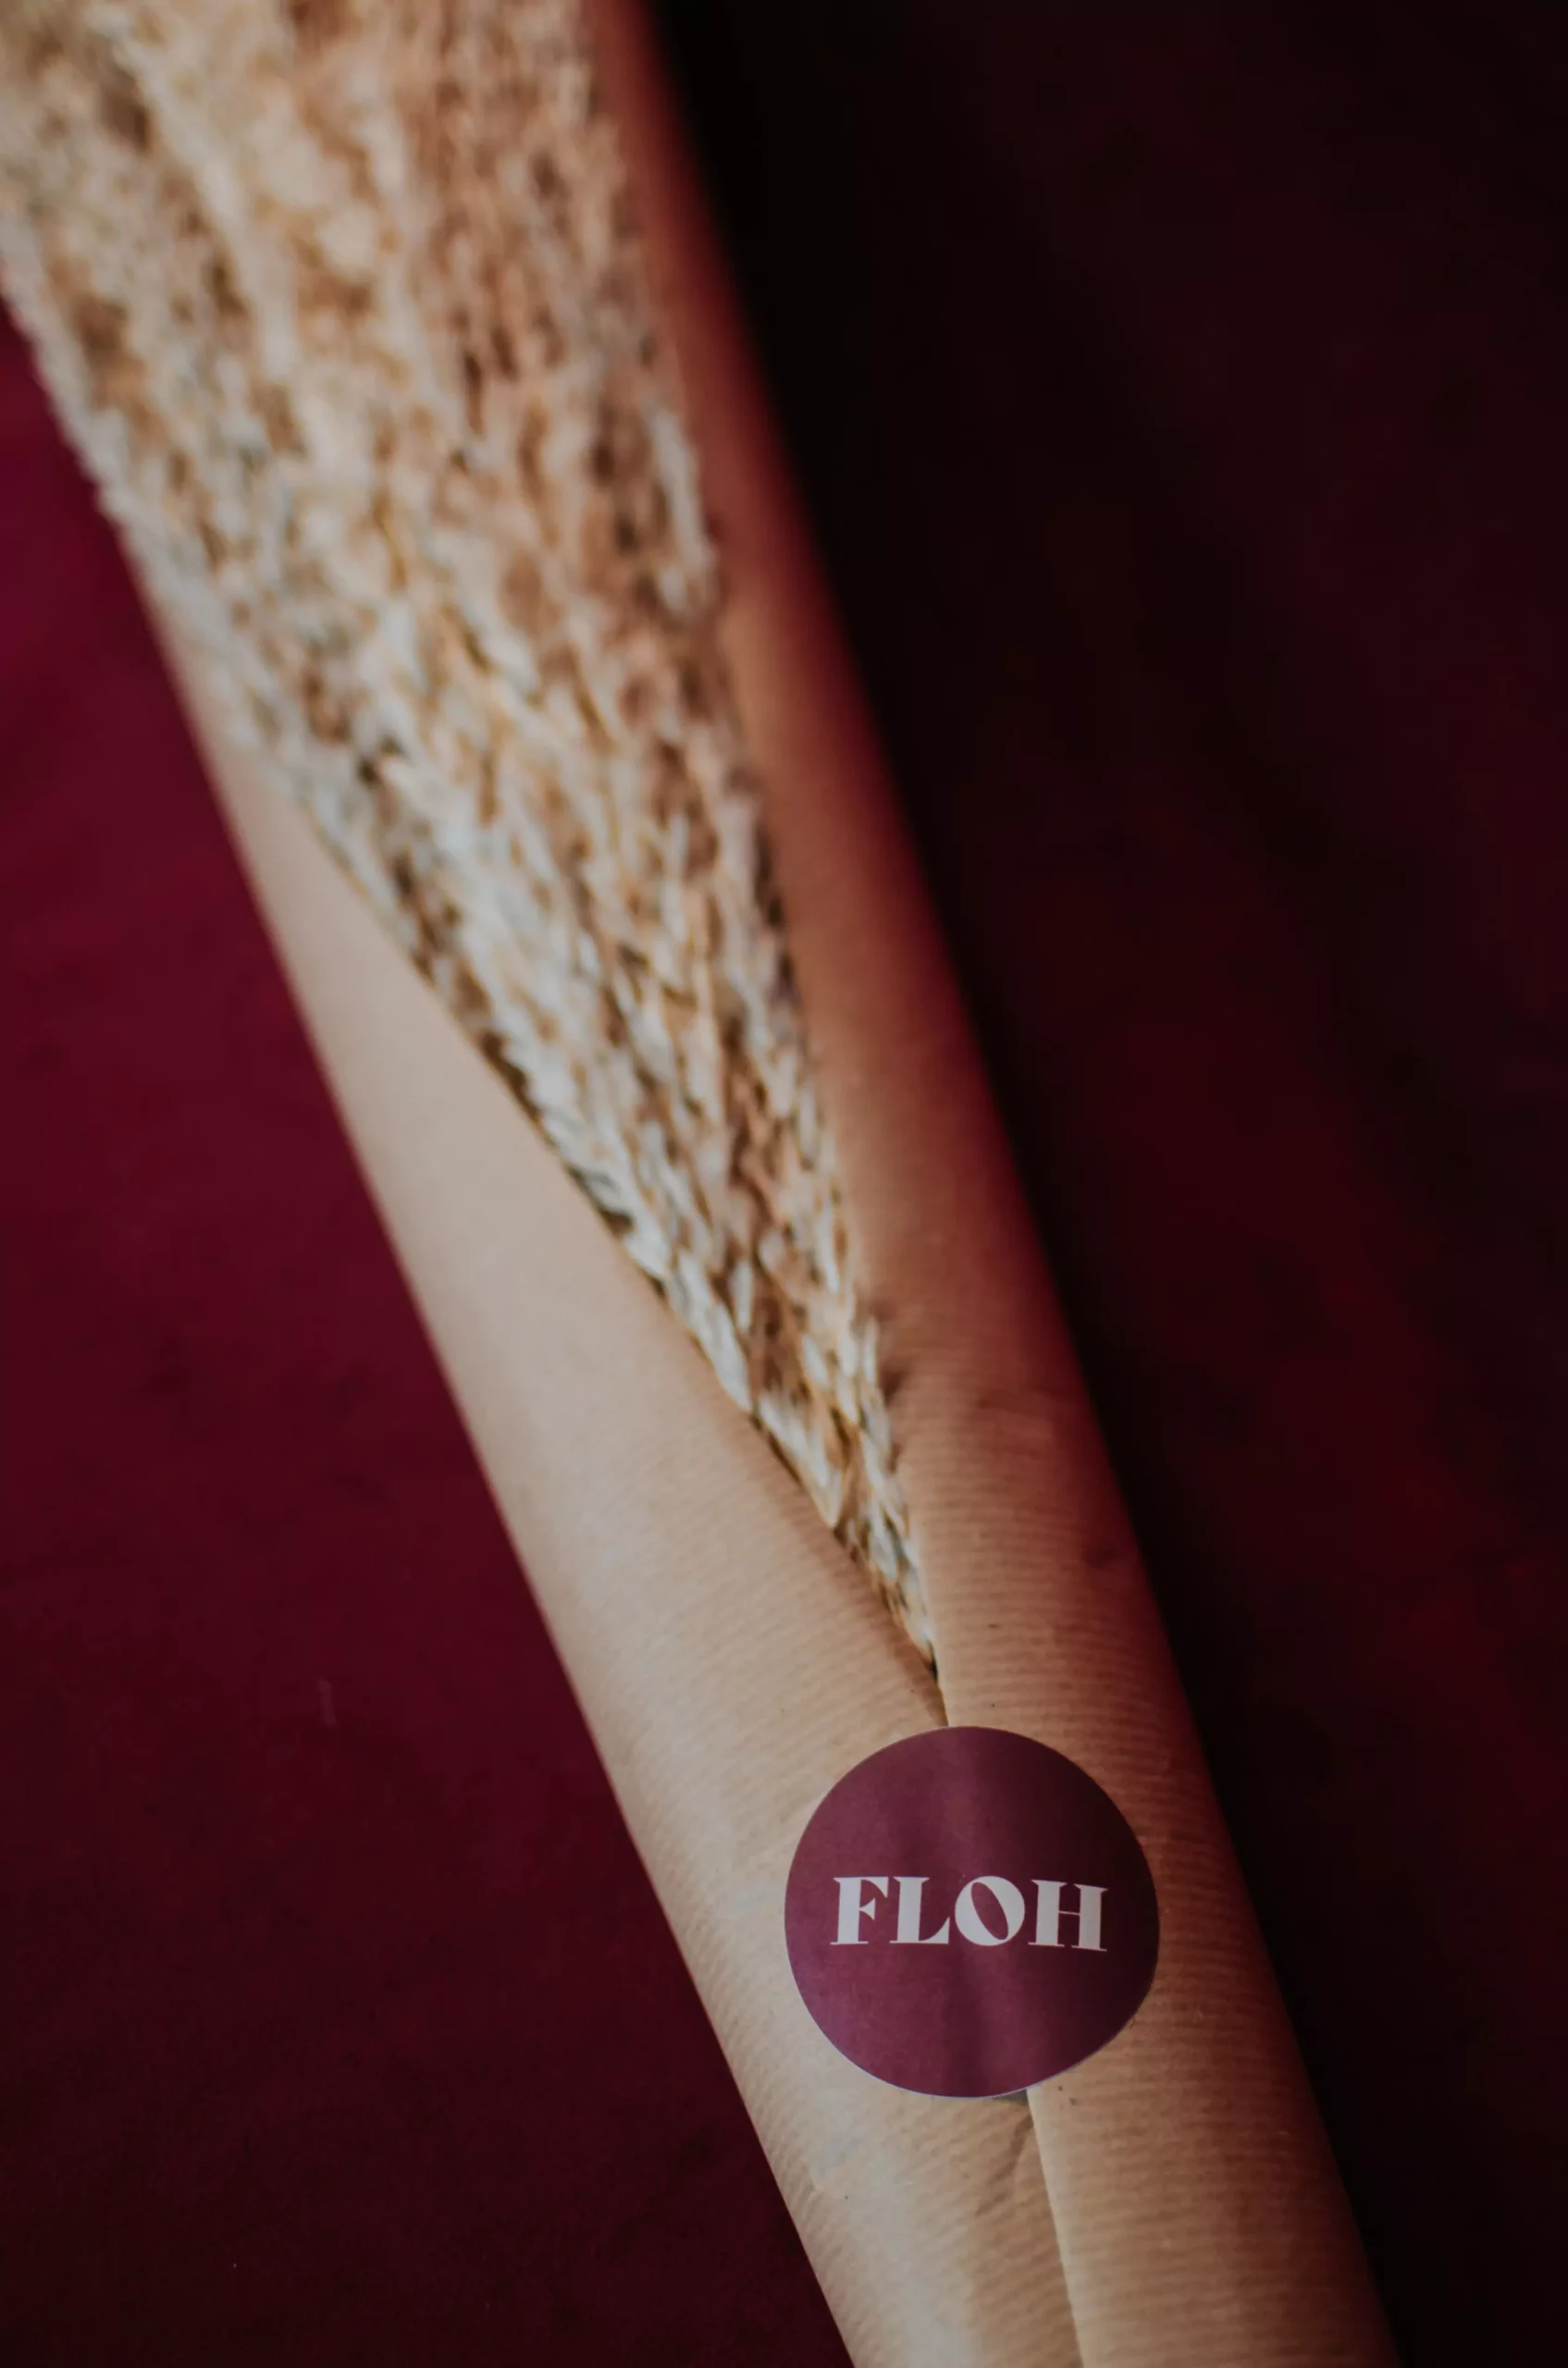 Floh Brand Identity - Packaging Dried Flowers closed with sticker